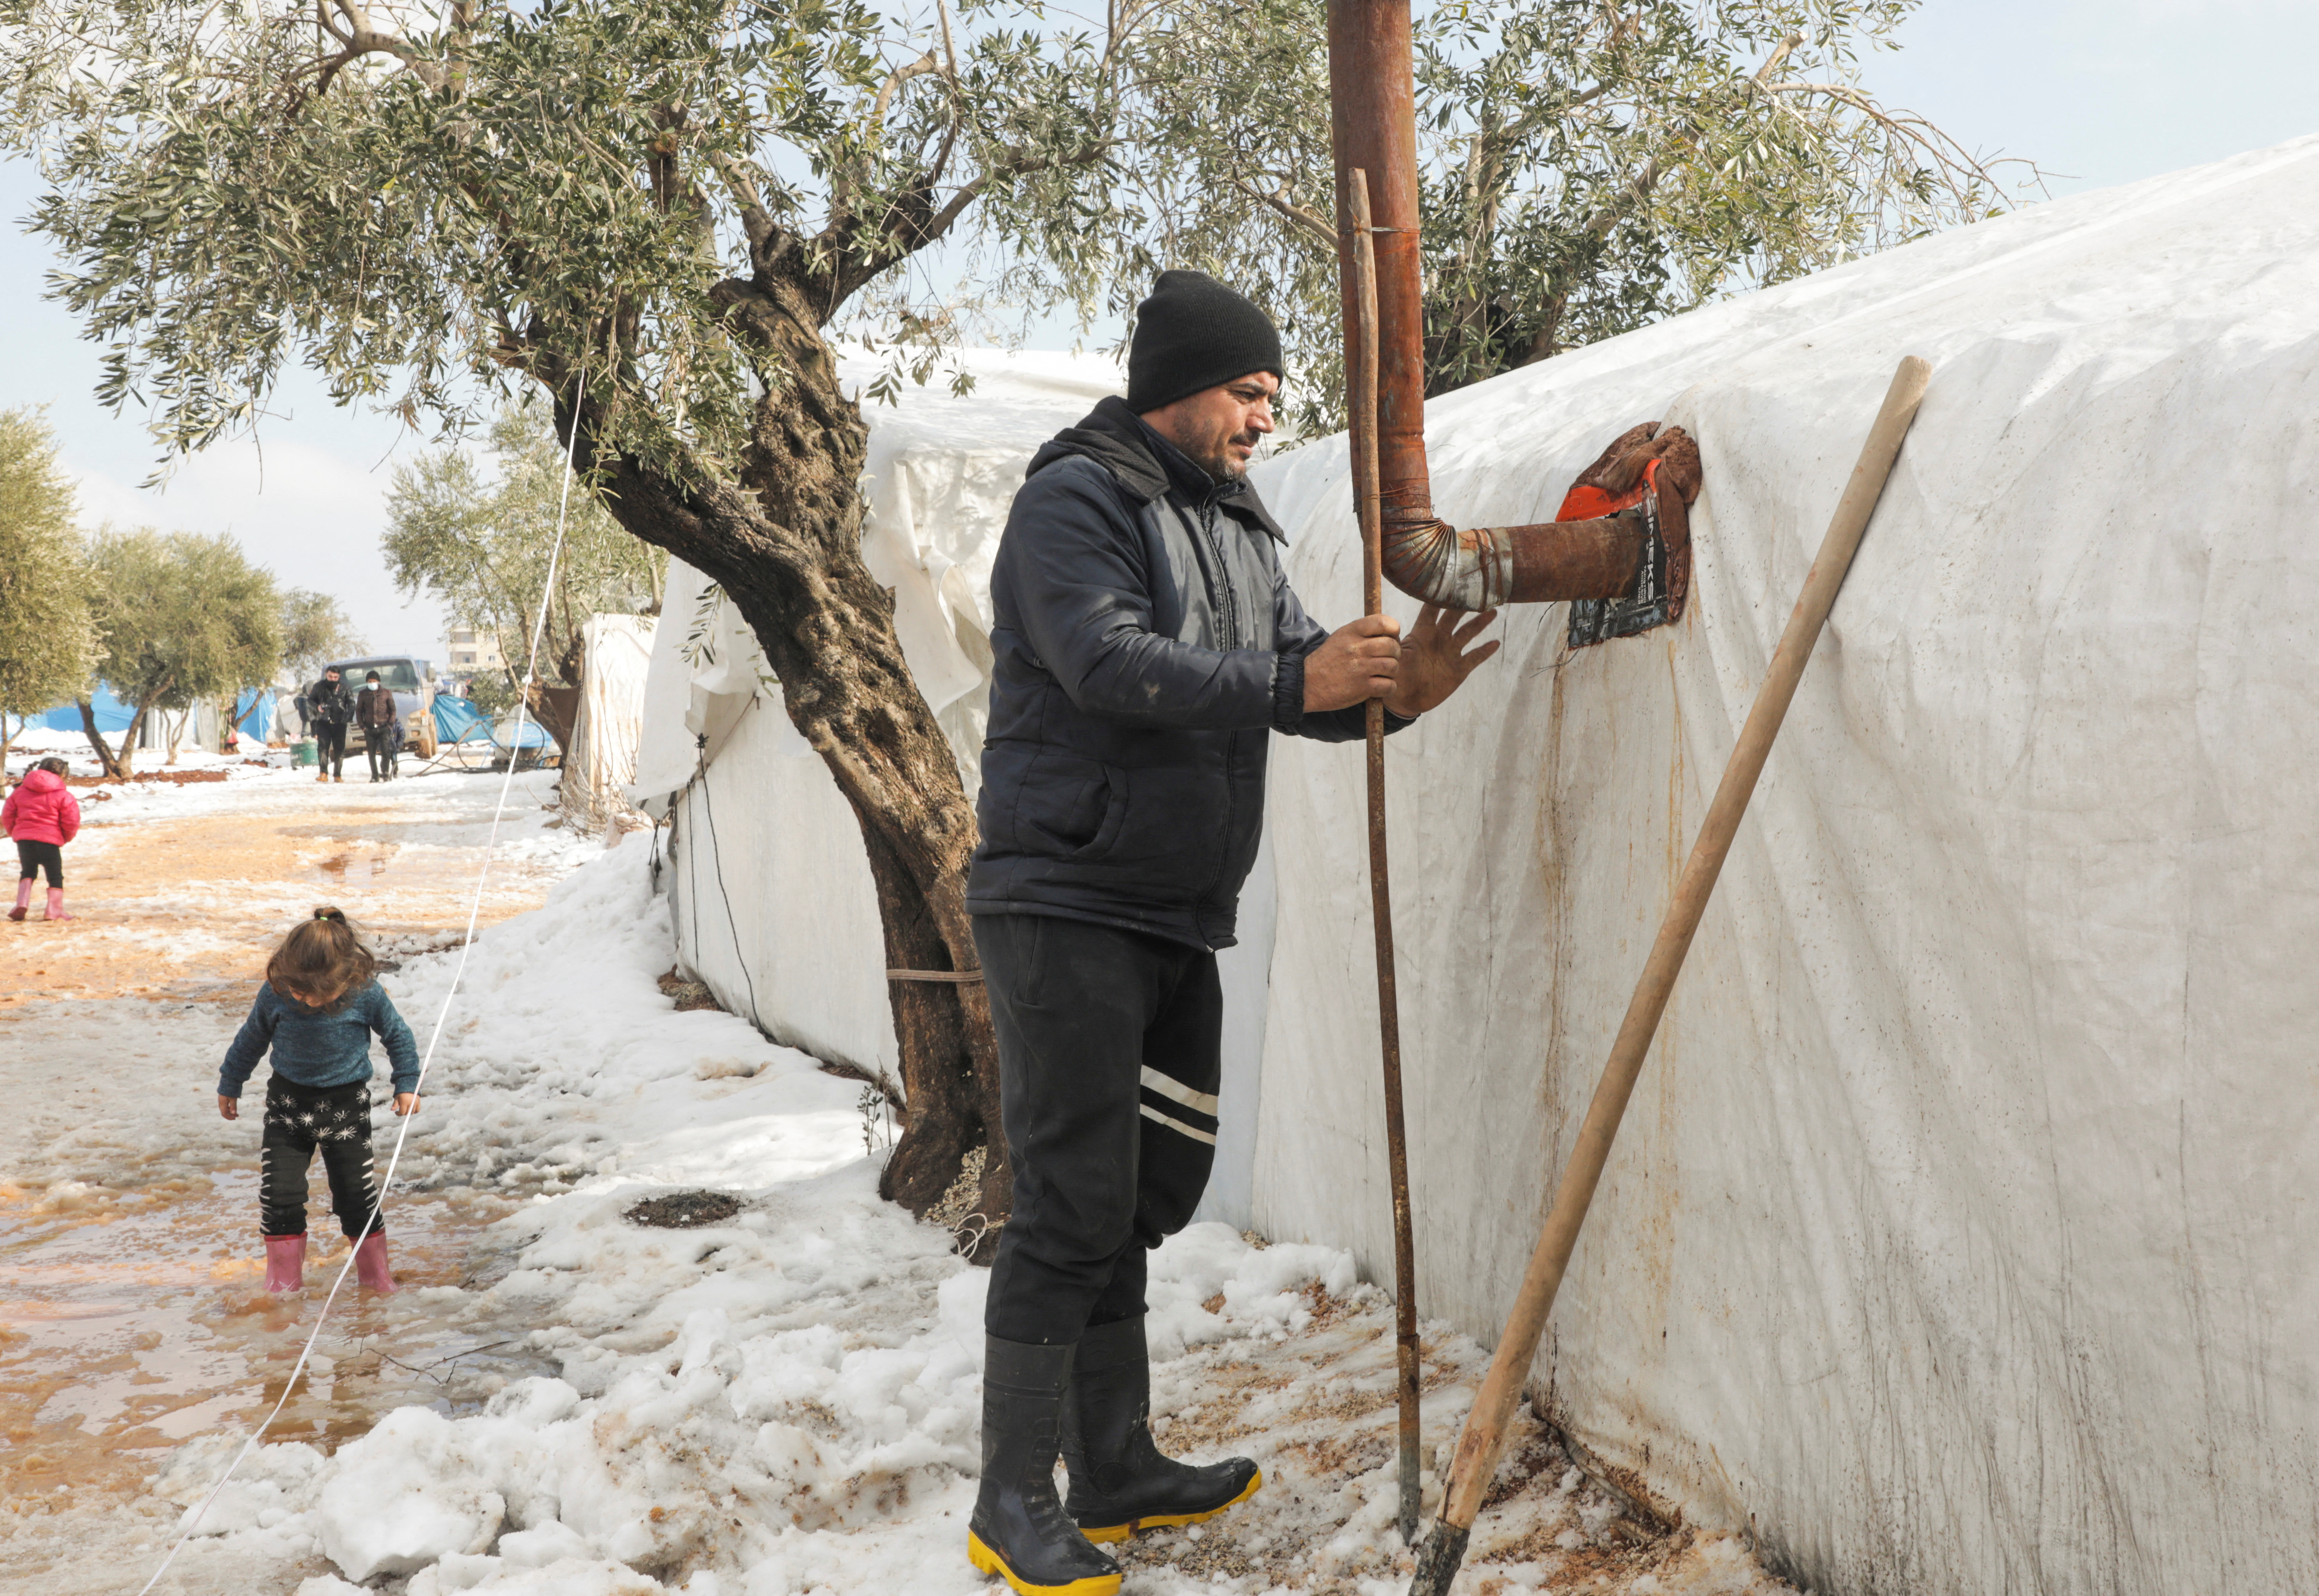 Bilal Ibrahim al-Sayyar, an internally displaced man clears snow from his tent at a camp in the Aleppo countryside